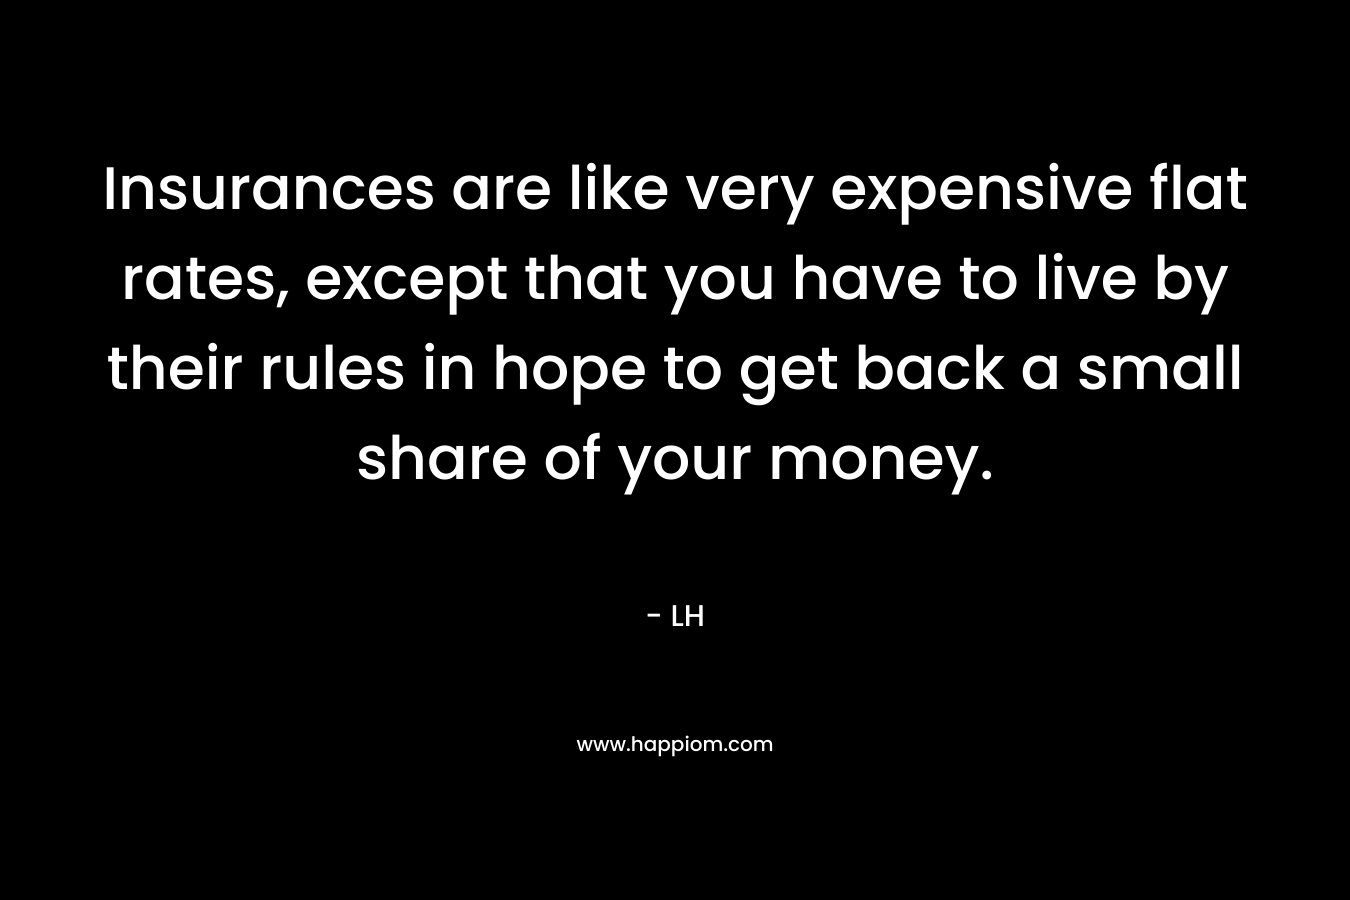 Insurances are like very expensive flat rates, except that you have to live by their rules in hope to get back a small share of your money. – LH